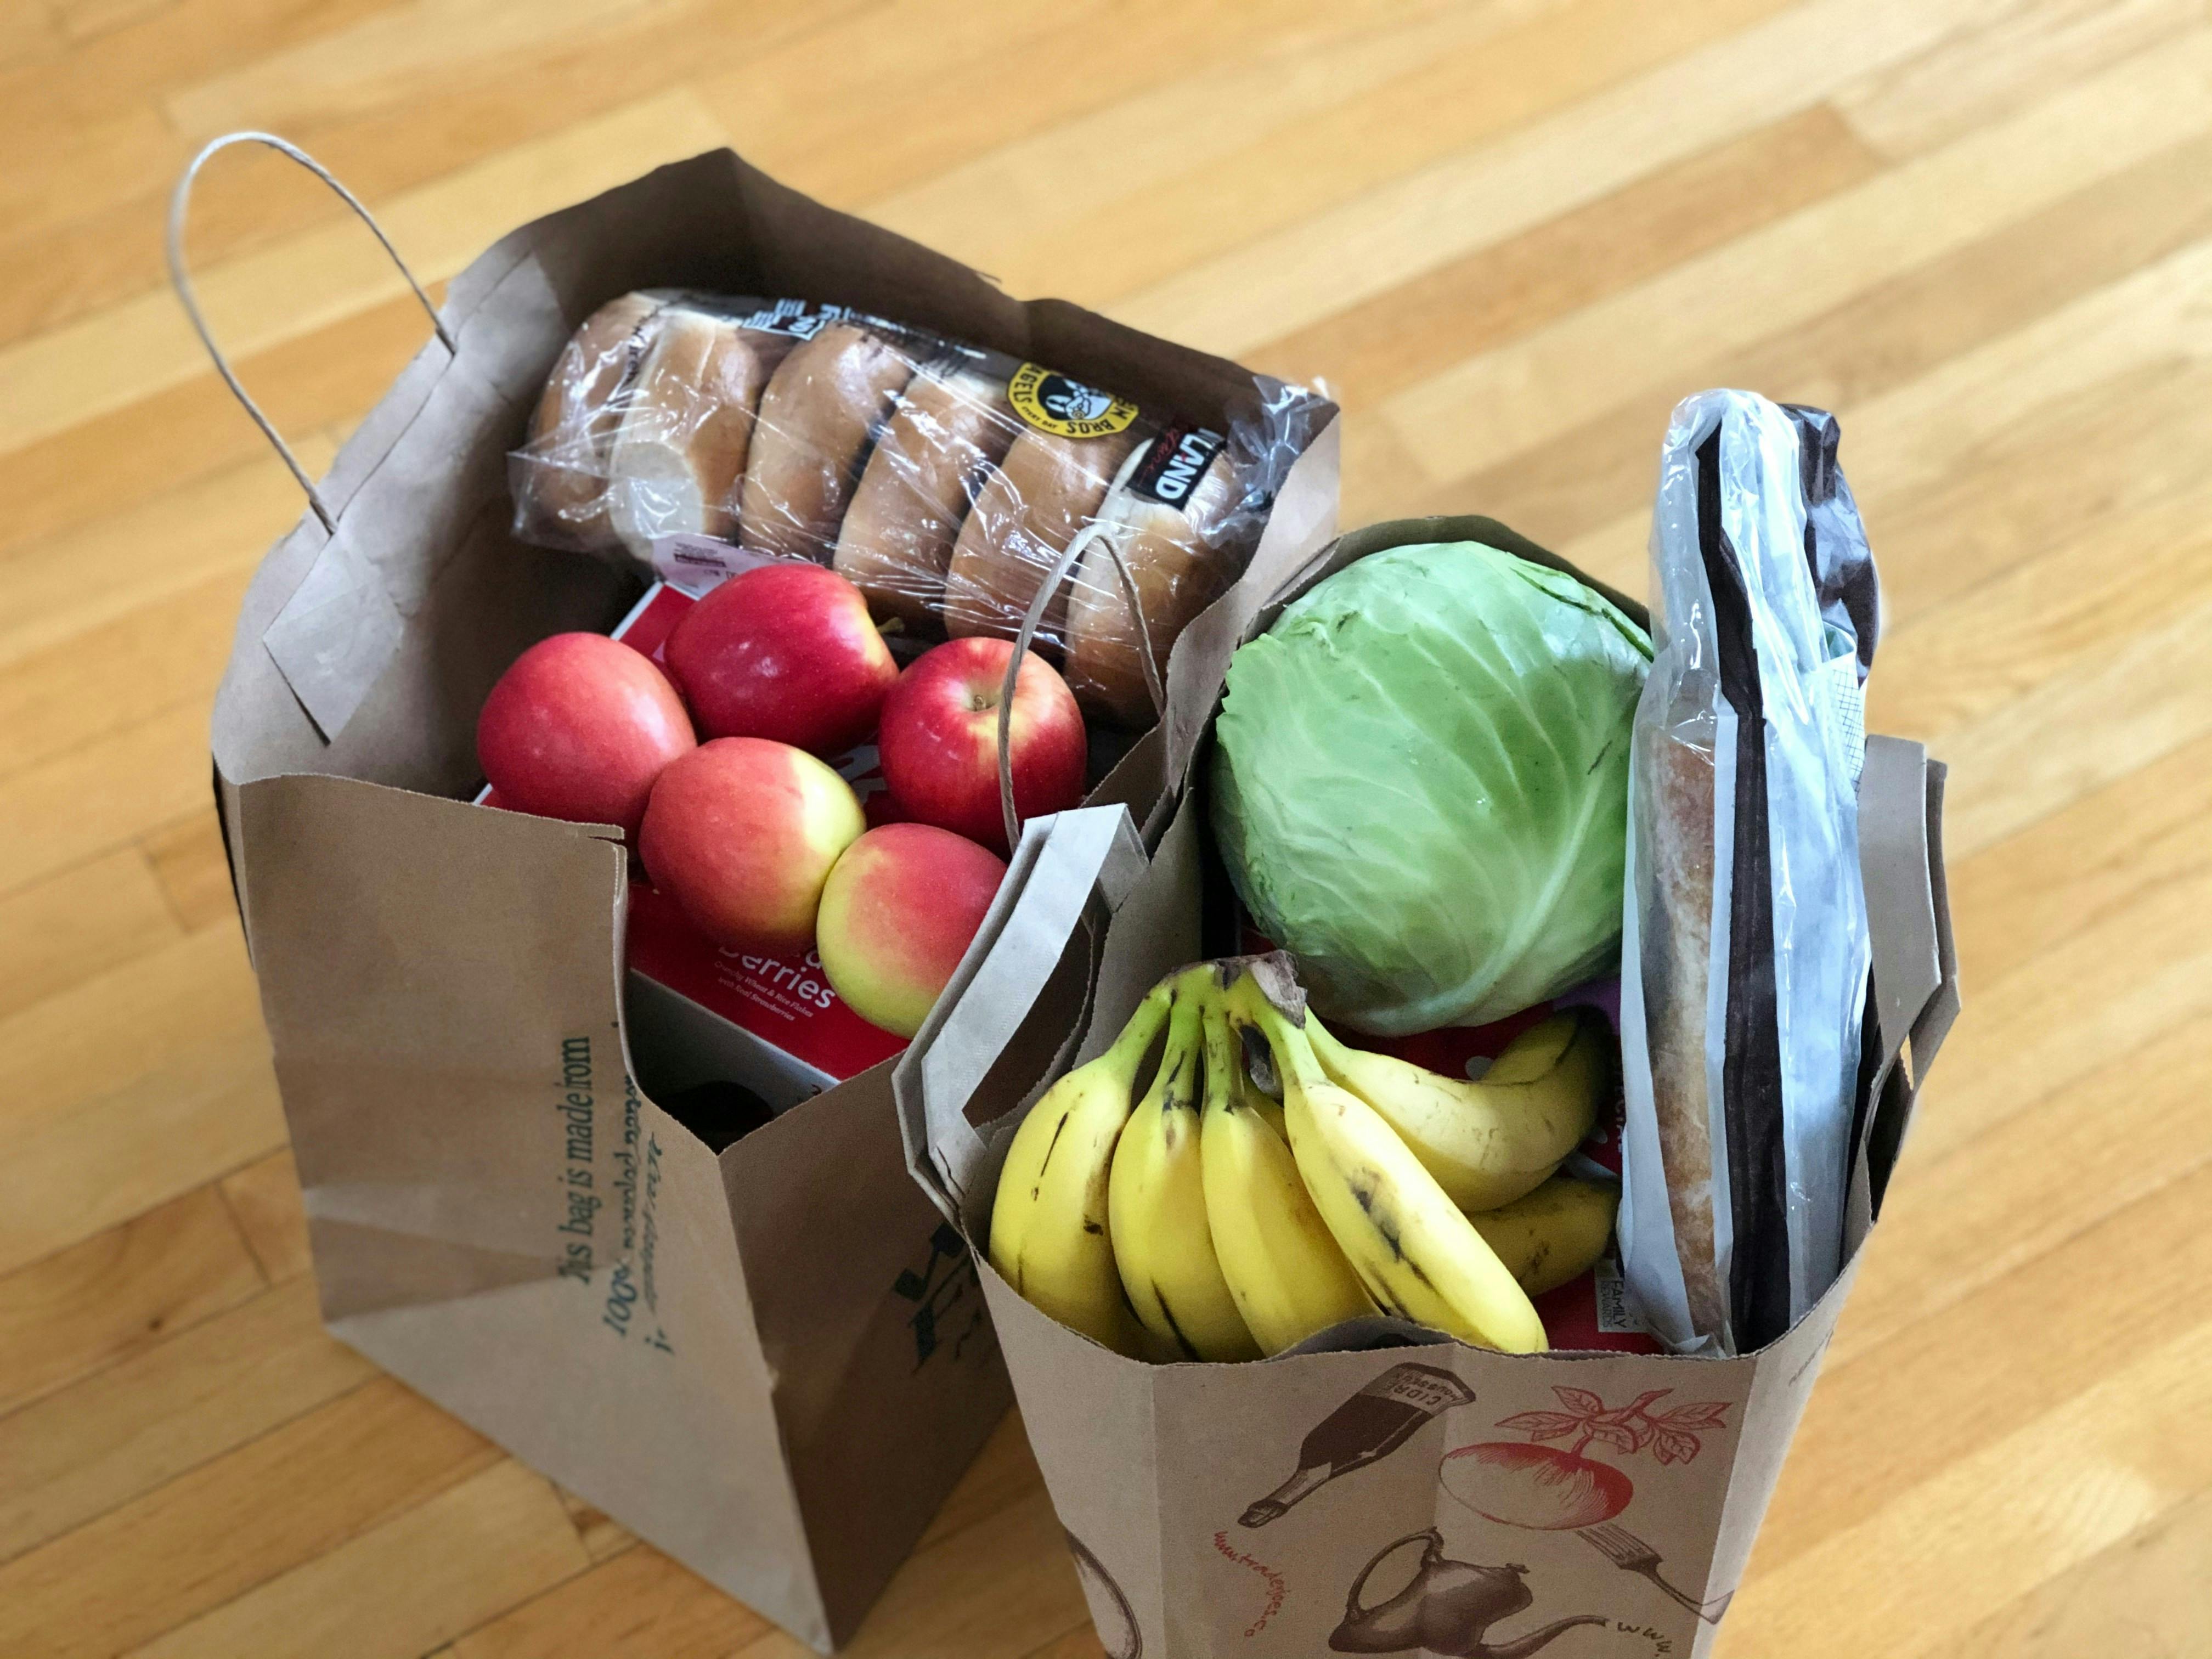 Two paper bags of groceries on a wooden floor. Visible on top are apples, bagels, cabbage, bananas, and a baguette.